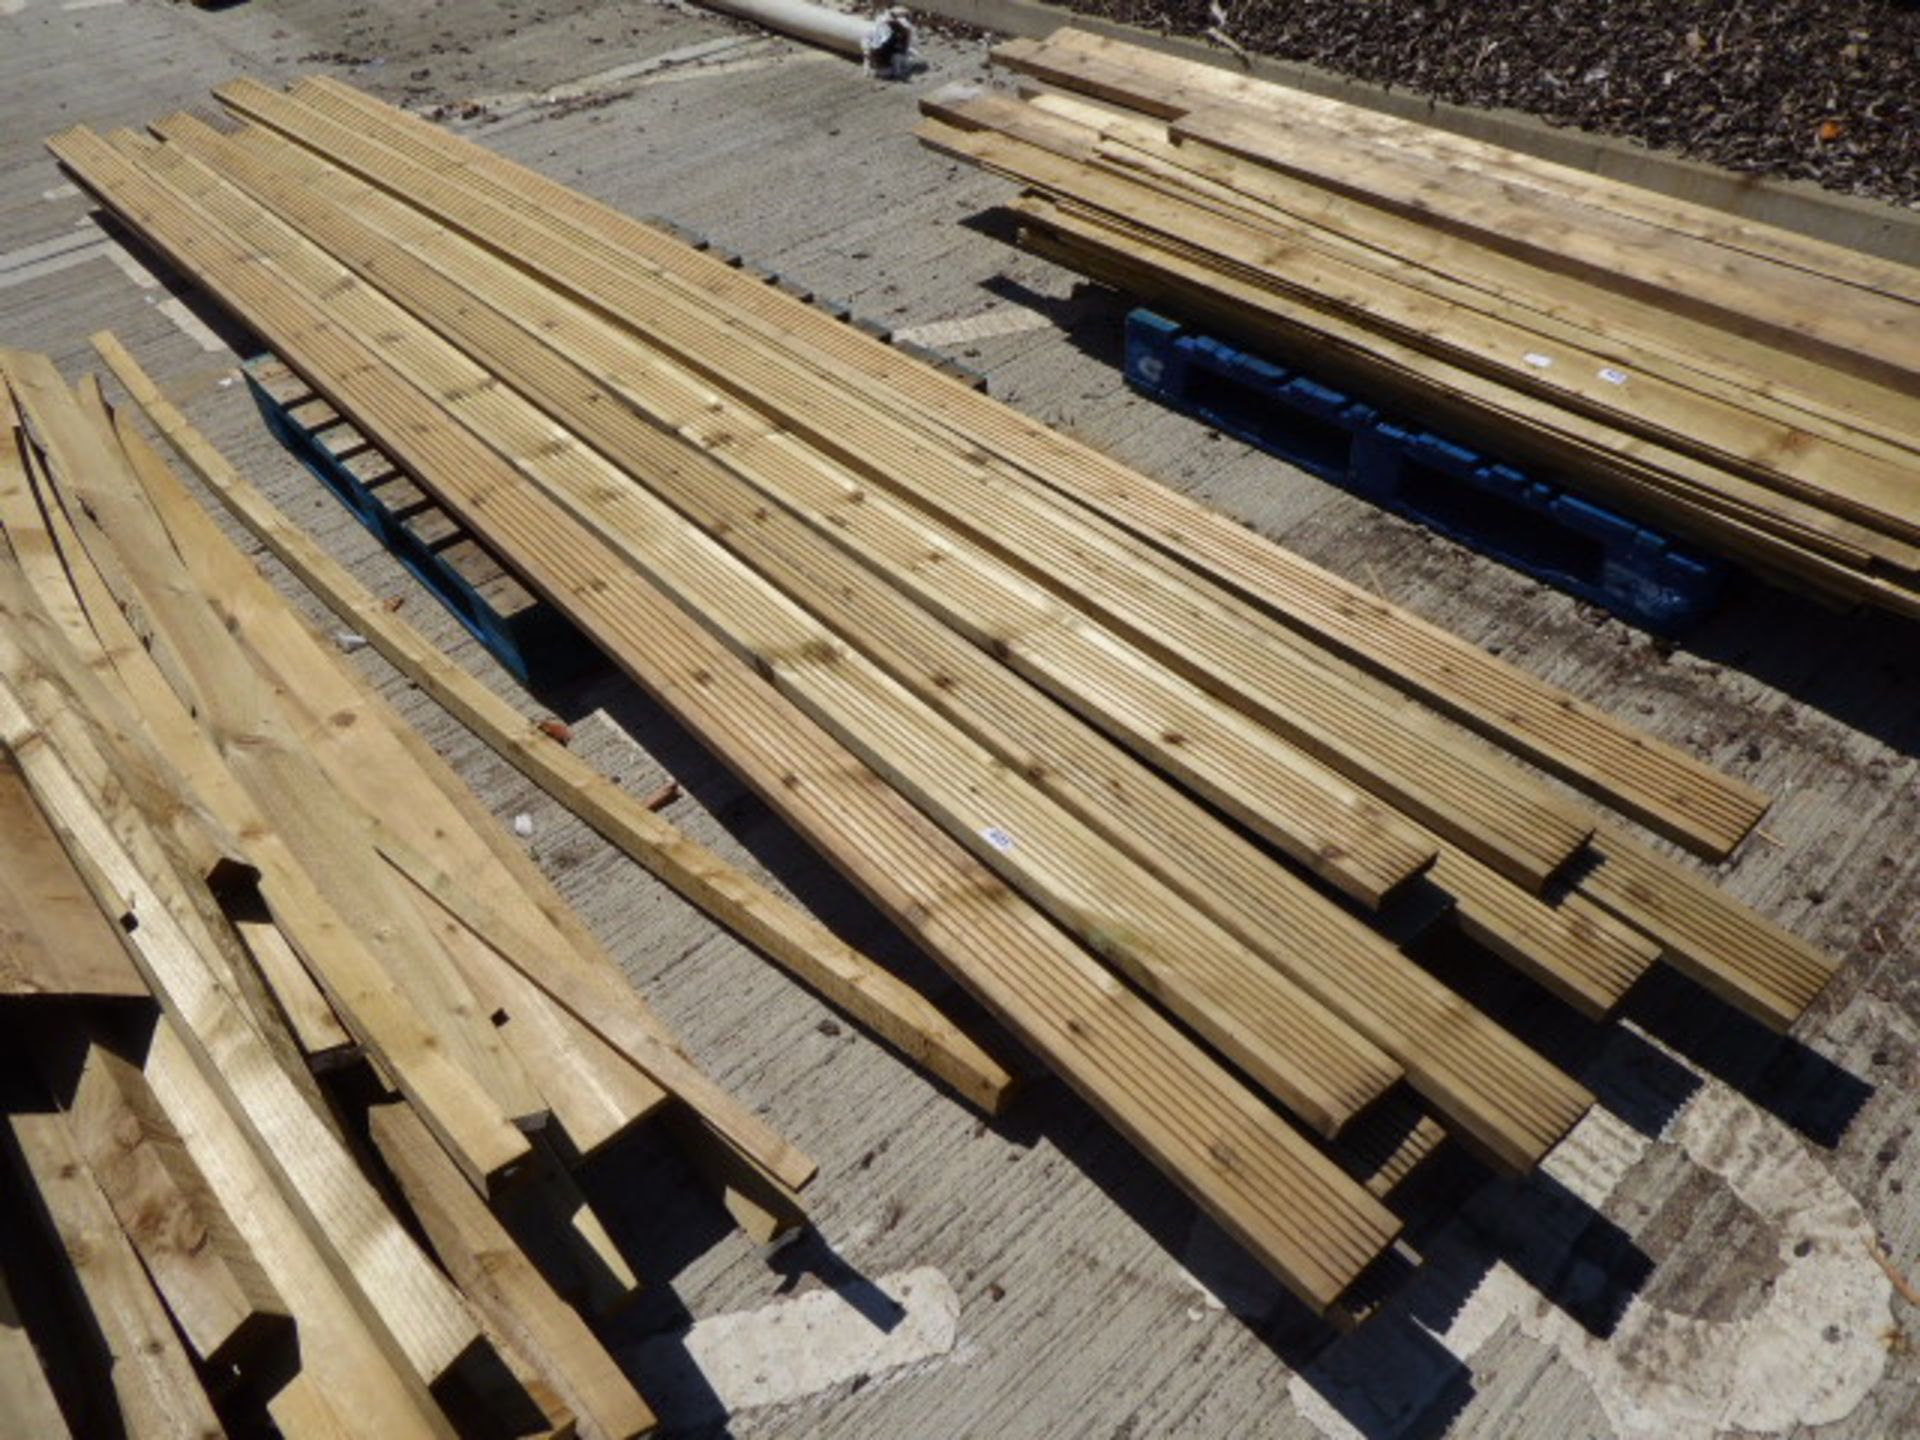 12 lengths of decking board